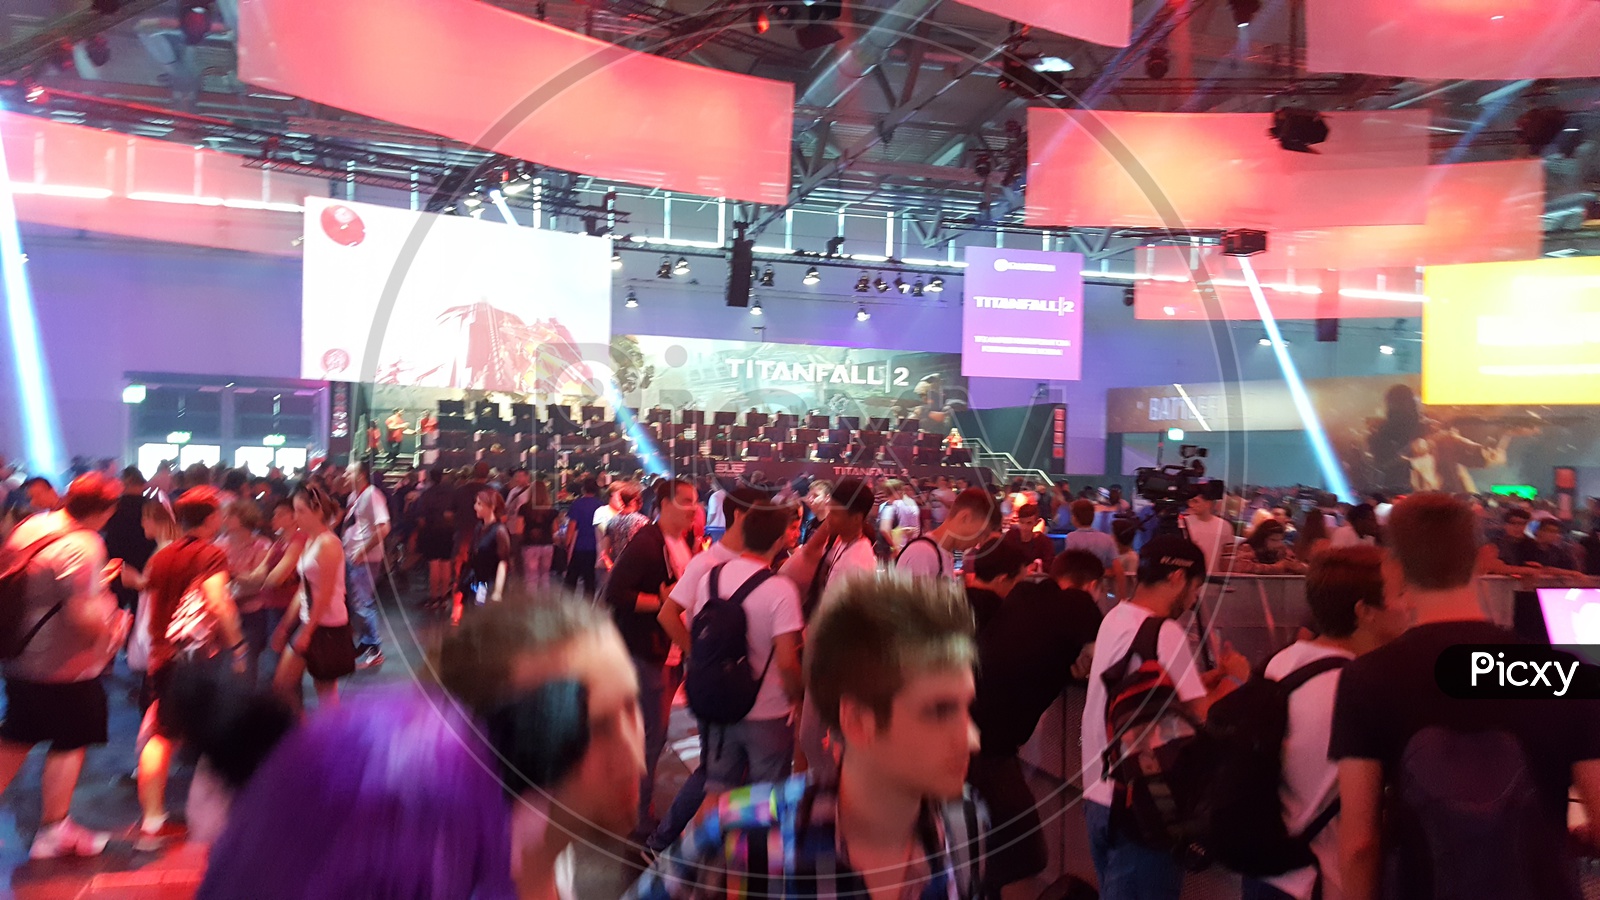 People at Gamescom, the world's largest trade fair for interactive consumer electronics, video games and computer games, Cologne